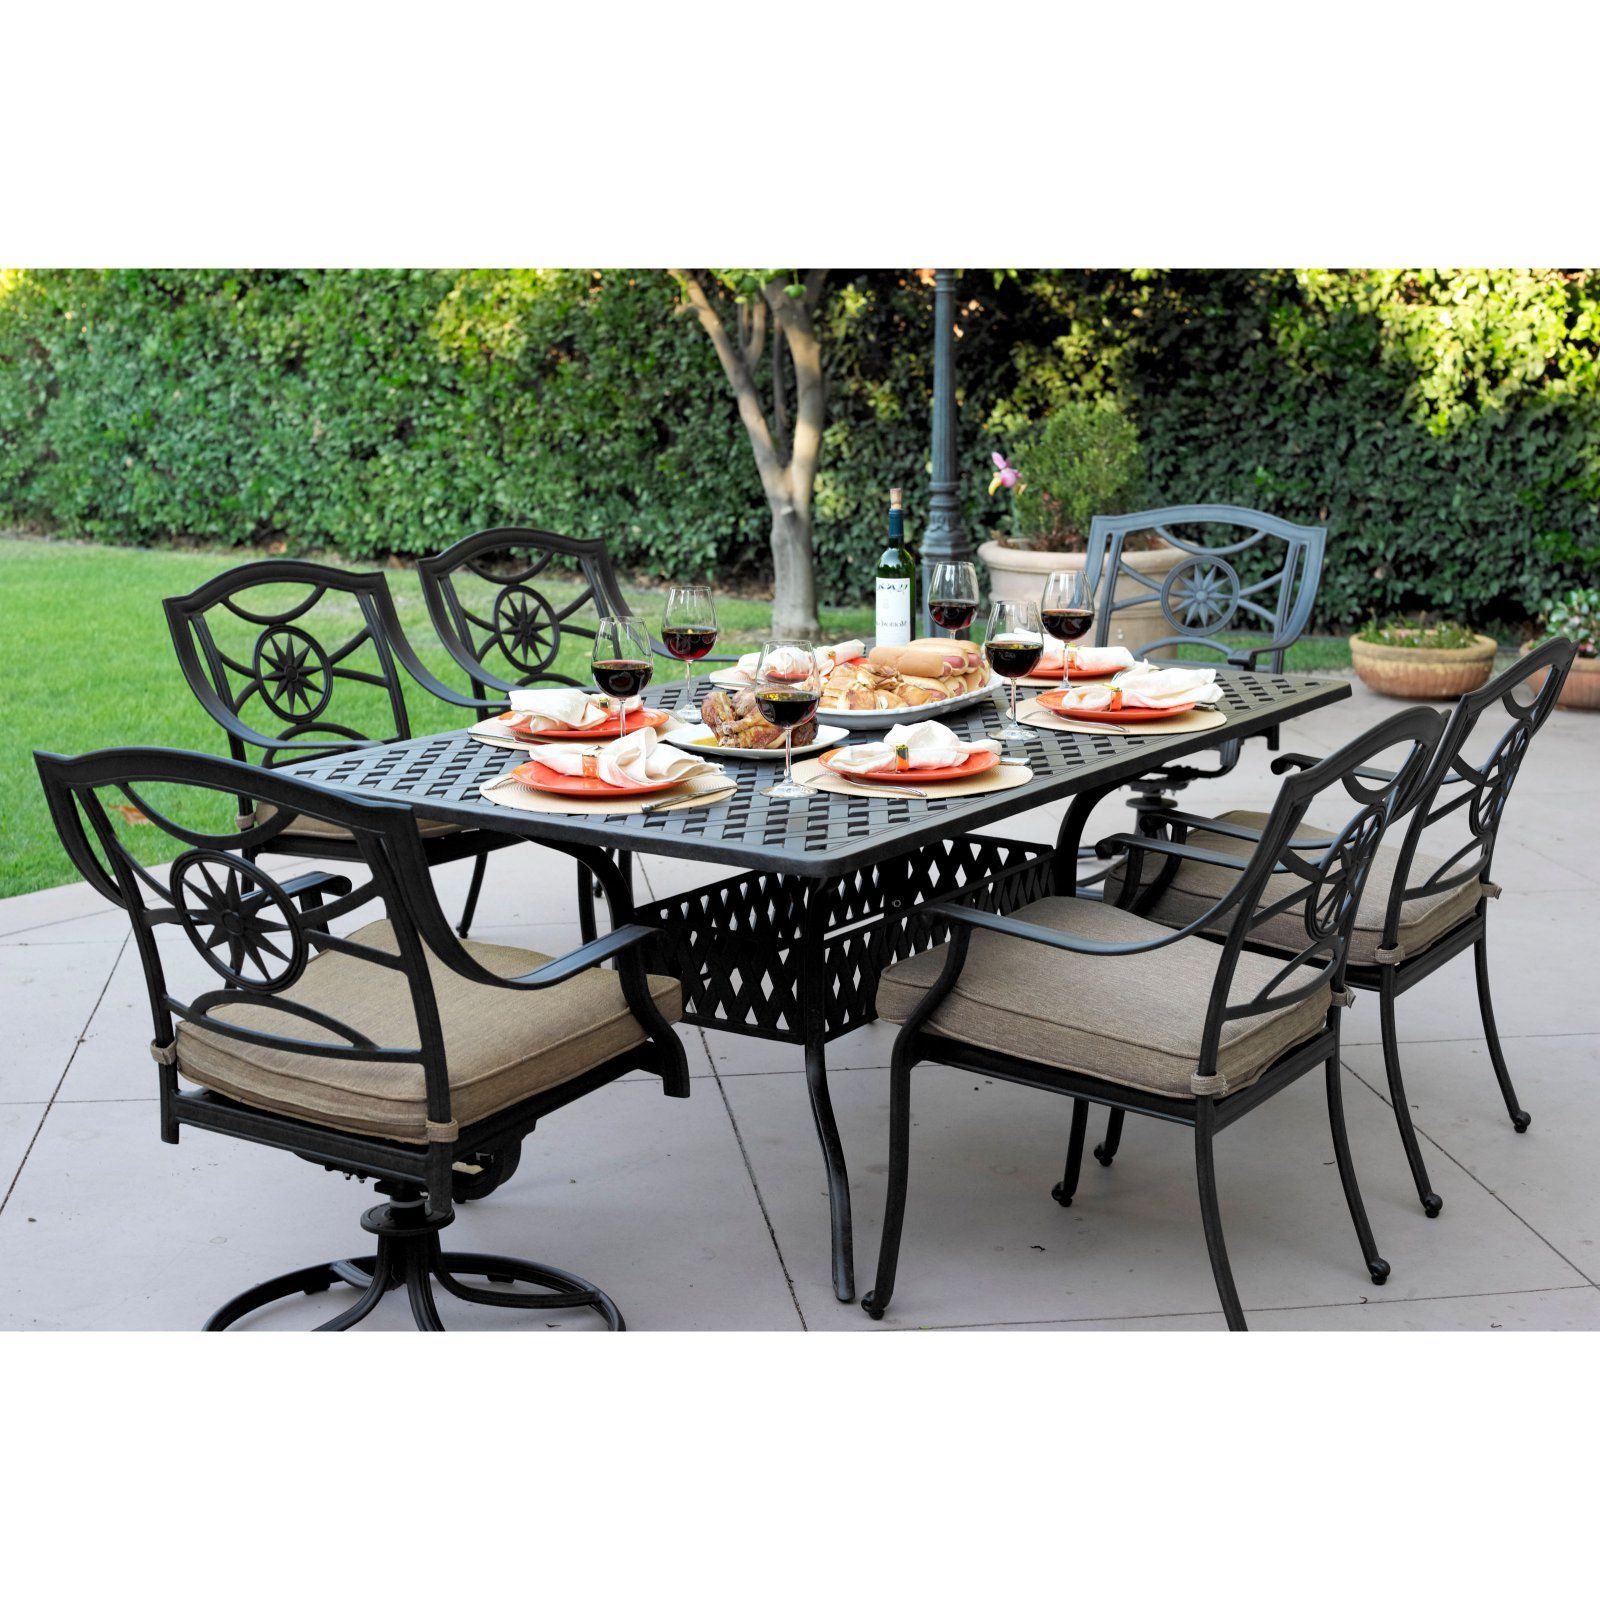 7 Piece Rectangular Patio Dining Sets With Regard To Well Known Outdoor Darlee Ten Star 7 Piece Aluminum Rectangular Patio Dining Set (View 9 of 15)